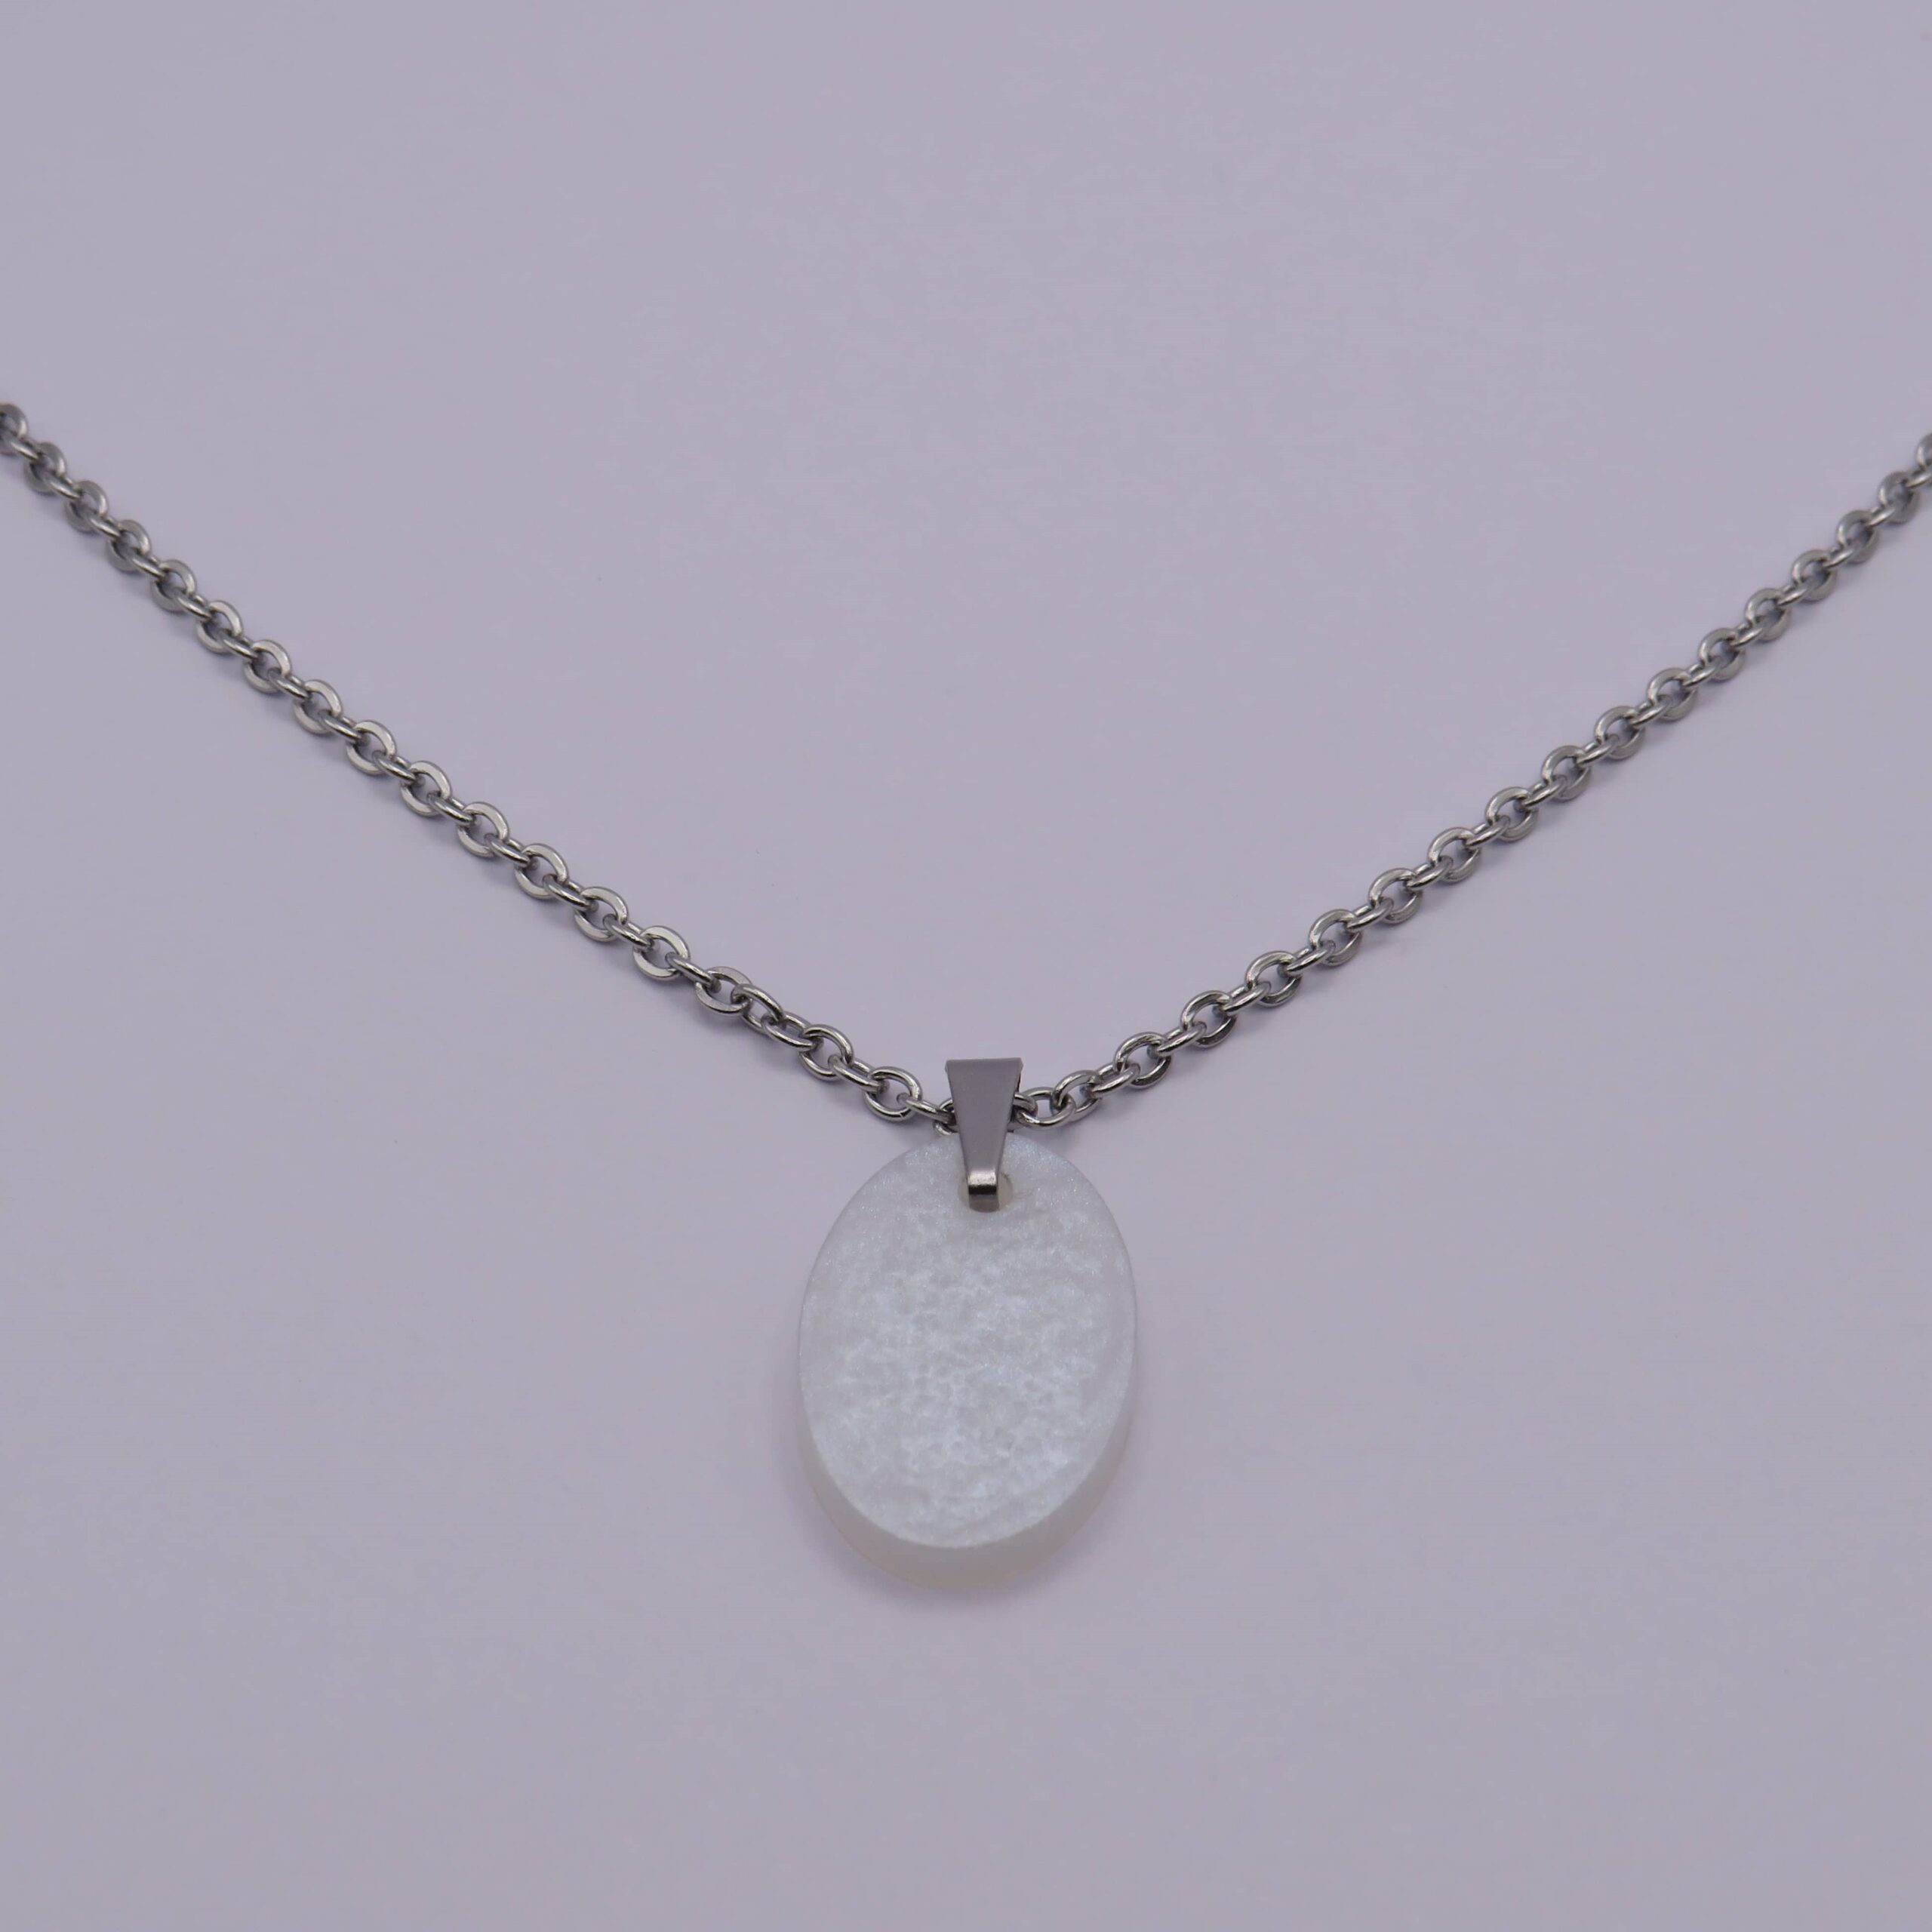 Stainless Steel White Oval Resin Pendant Necklace